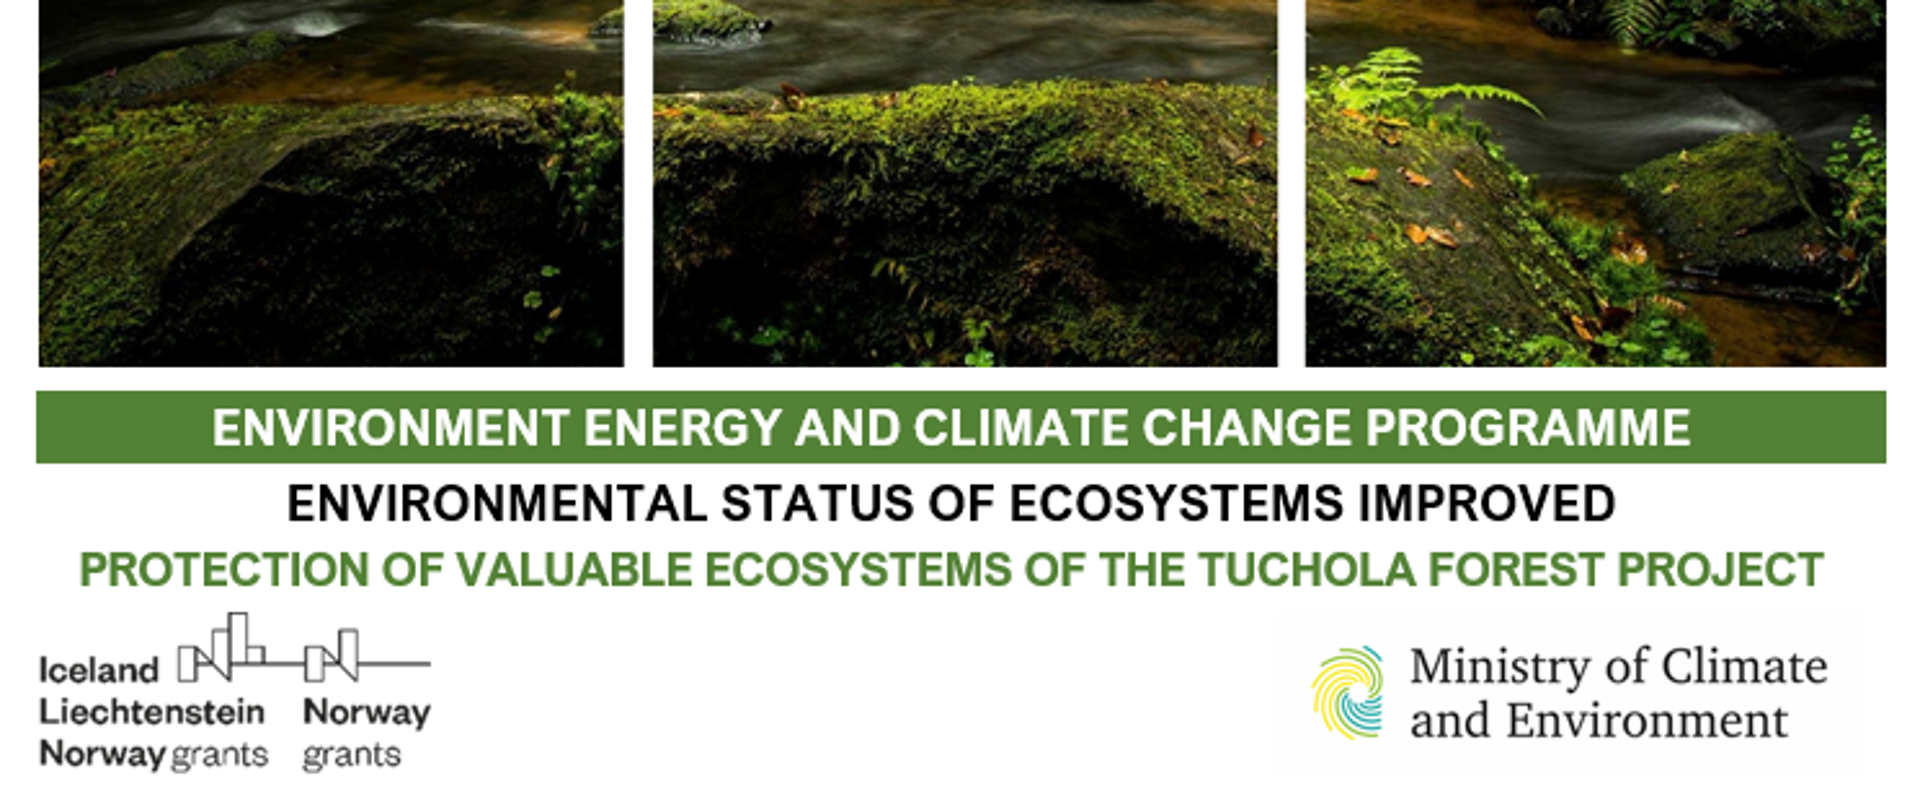 “Protection of valuable ecosystems of the Tuchola Forest” project